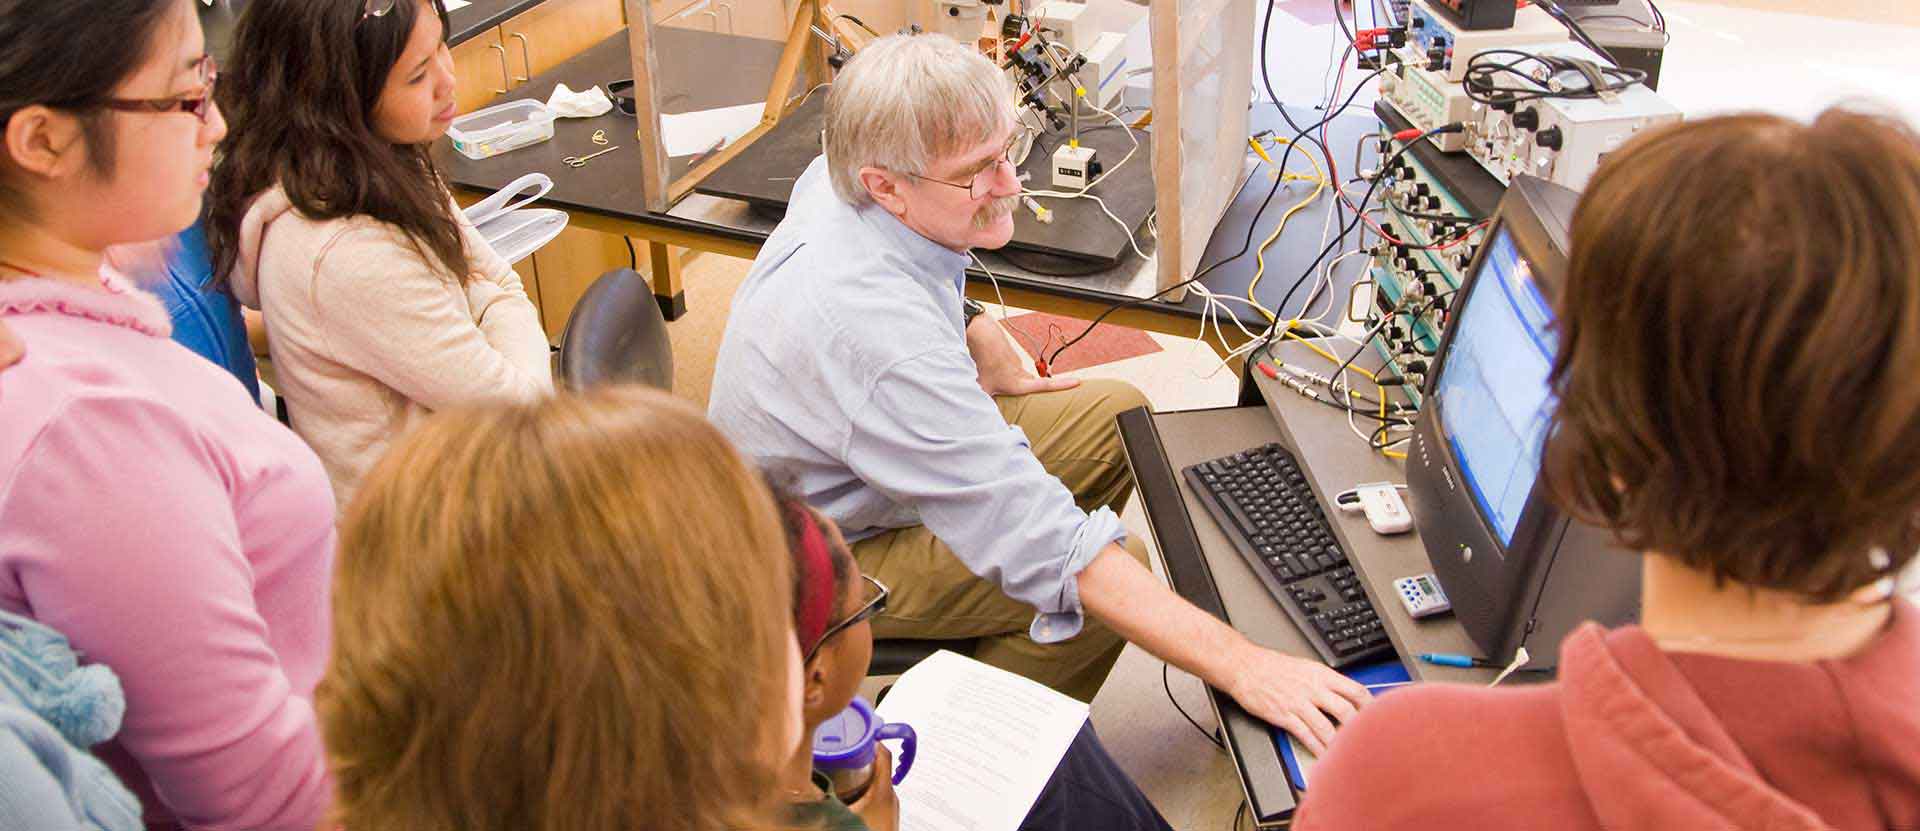 Neuroscience professor leads classroom through experiment in the lab